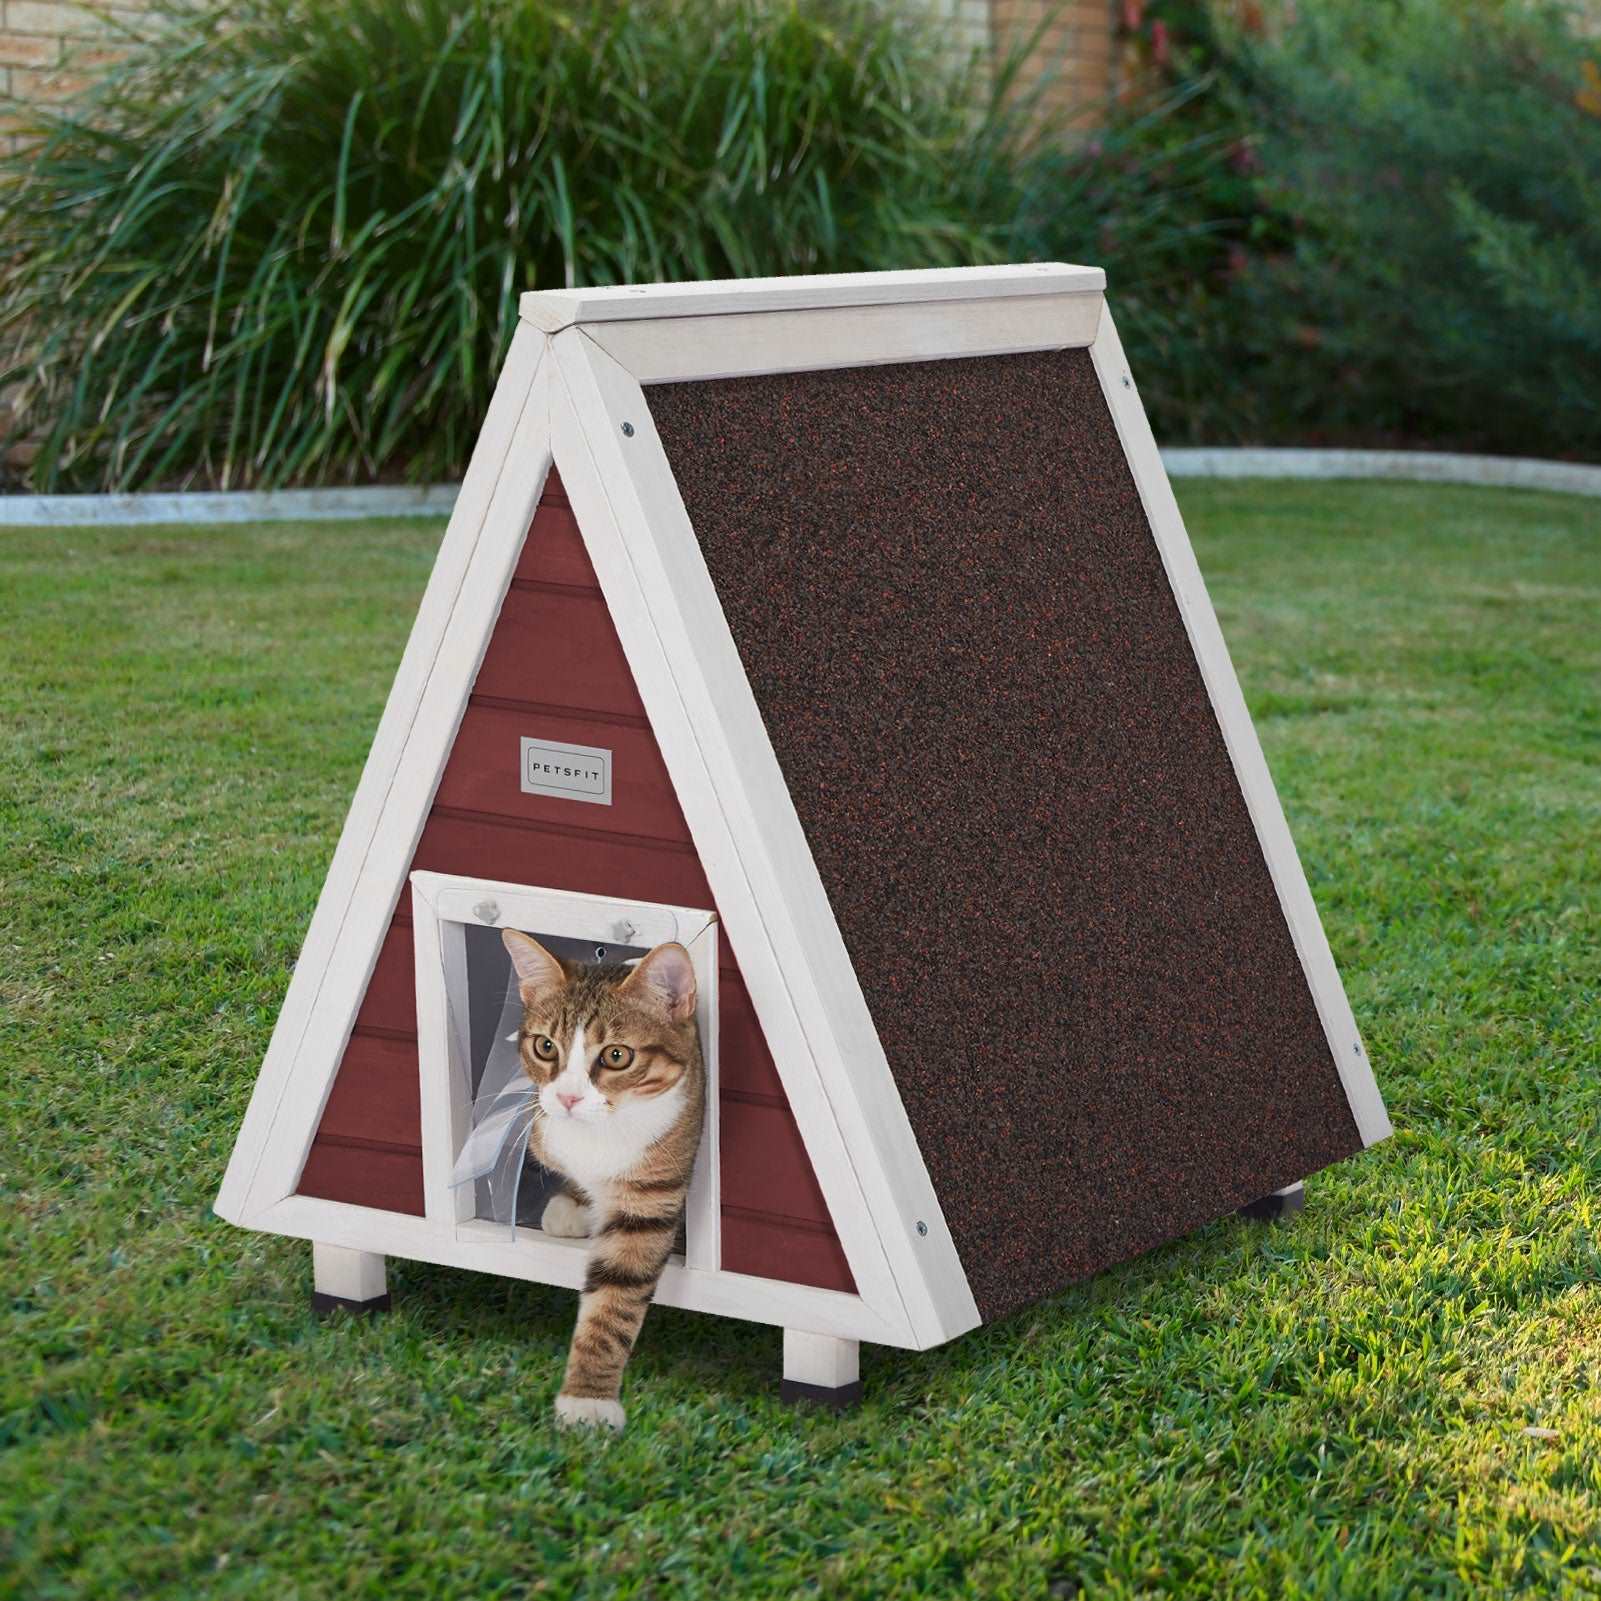 PETSFIT-Single-Story-Triangular-Cat-House-With-Foot-Stand-01